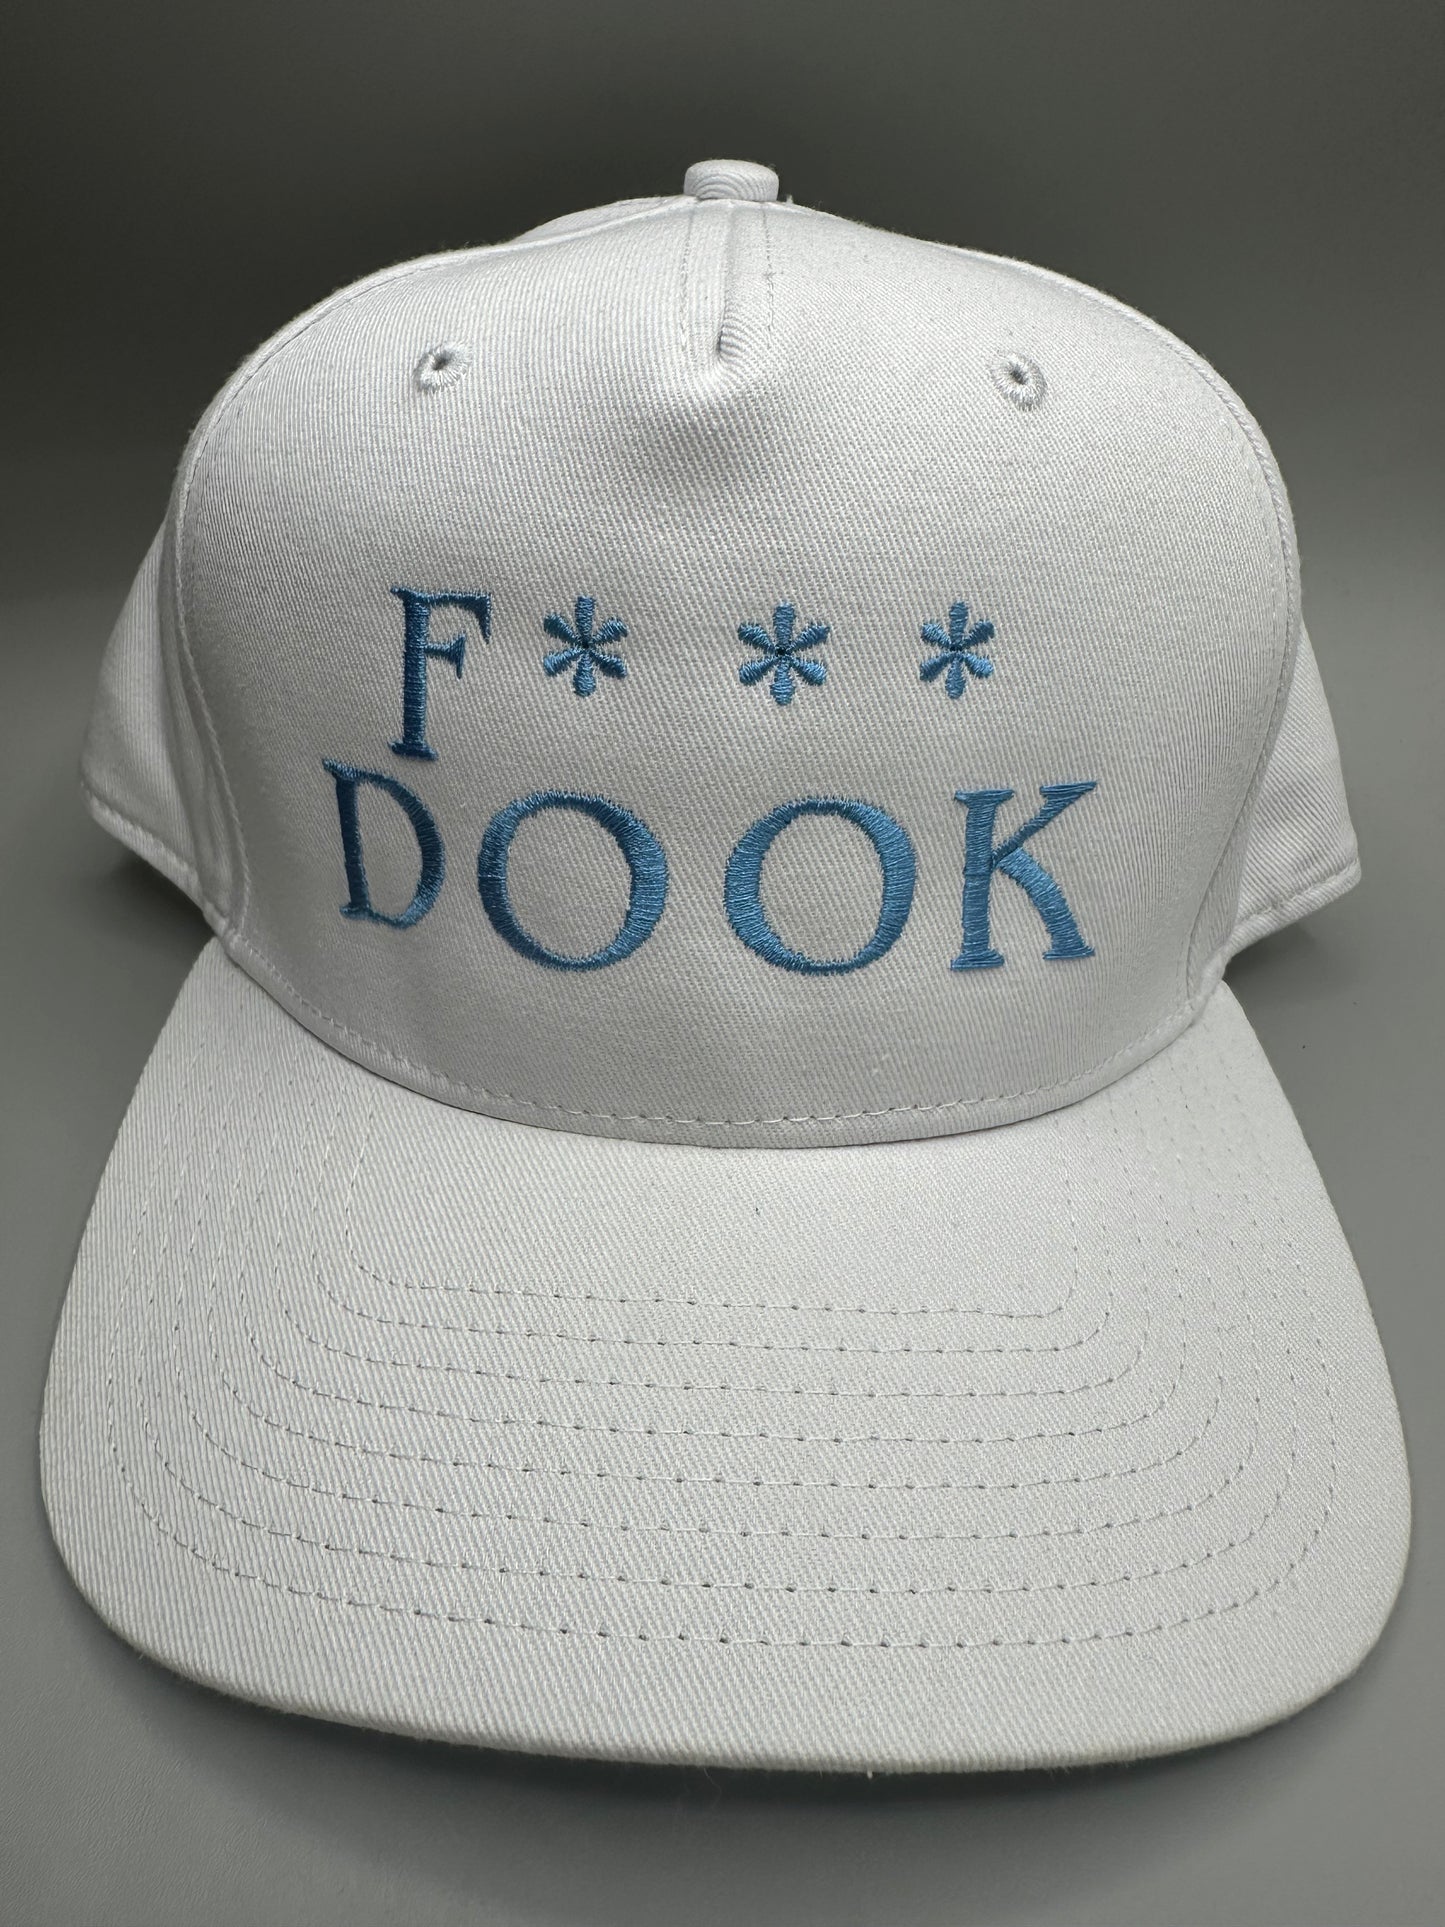 Beat Dook UNC Game Day Snapback Hat